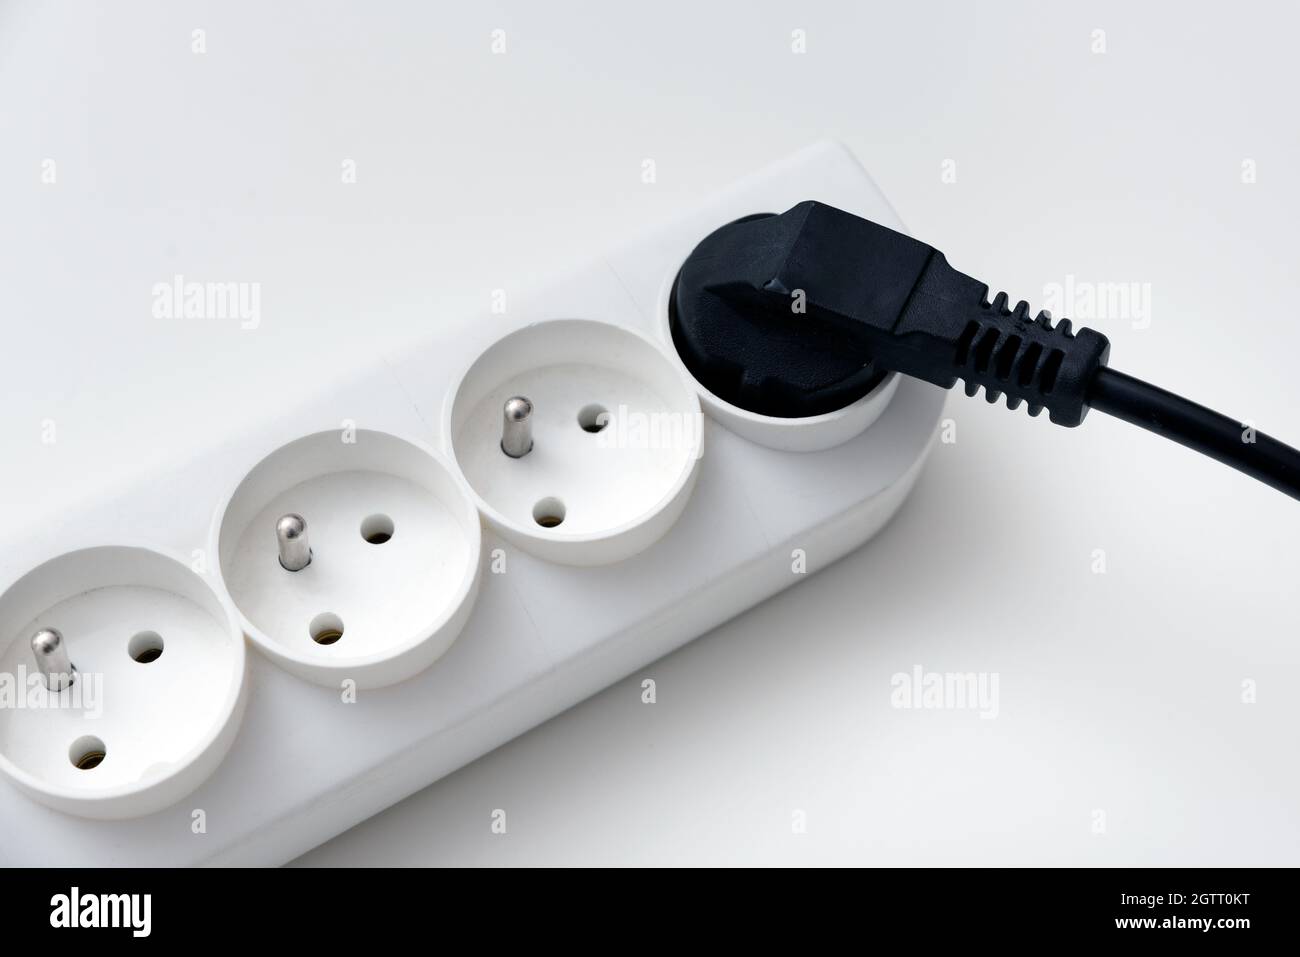 Electrical outlet, concept of rising electricity prices Stock Photo